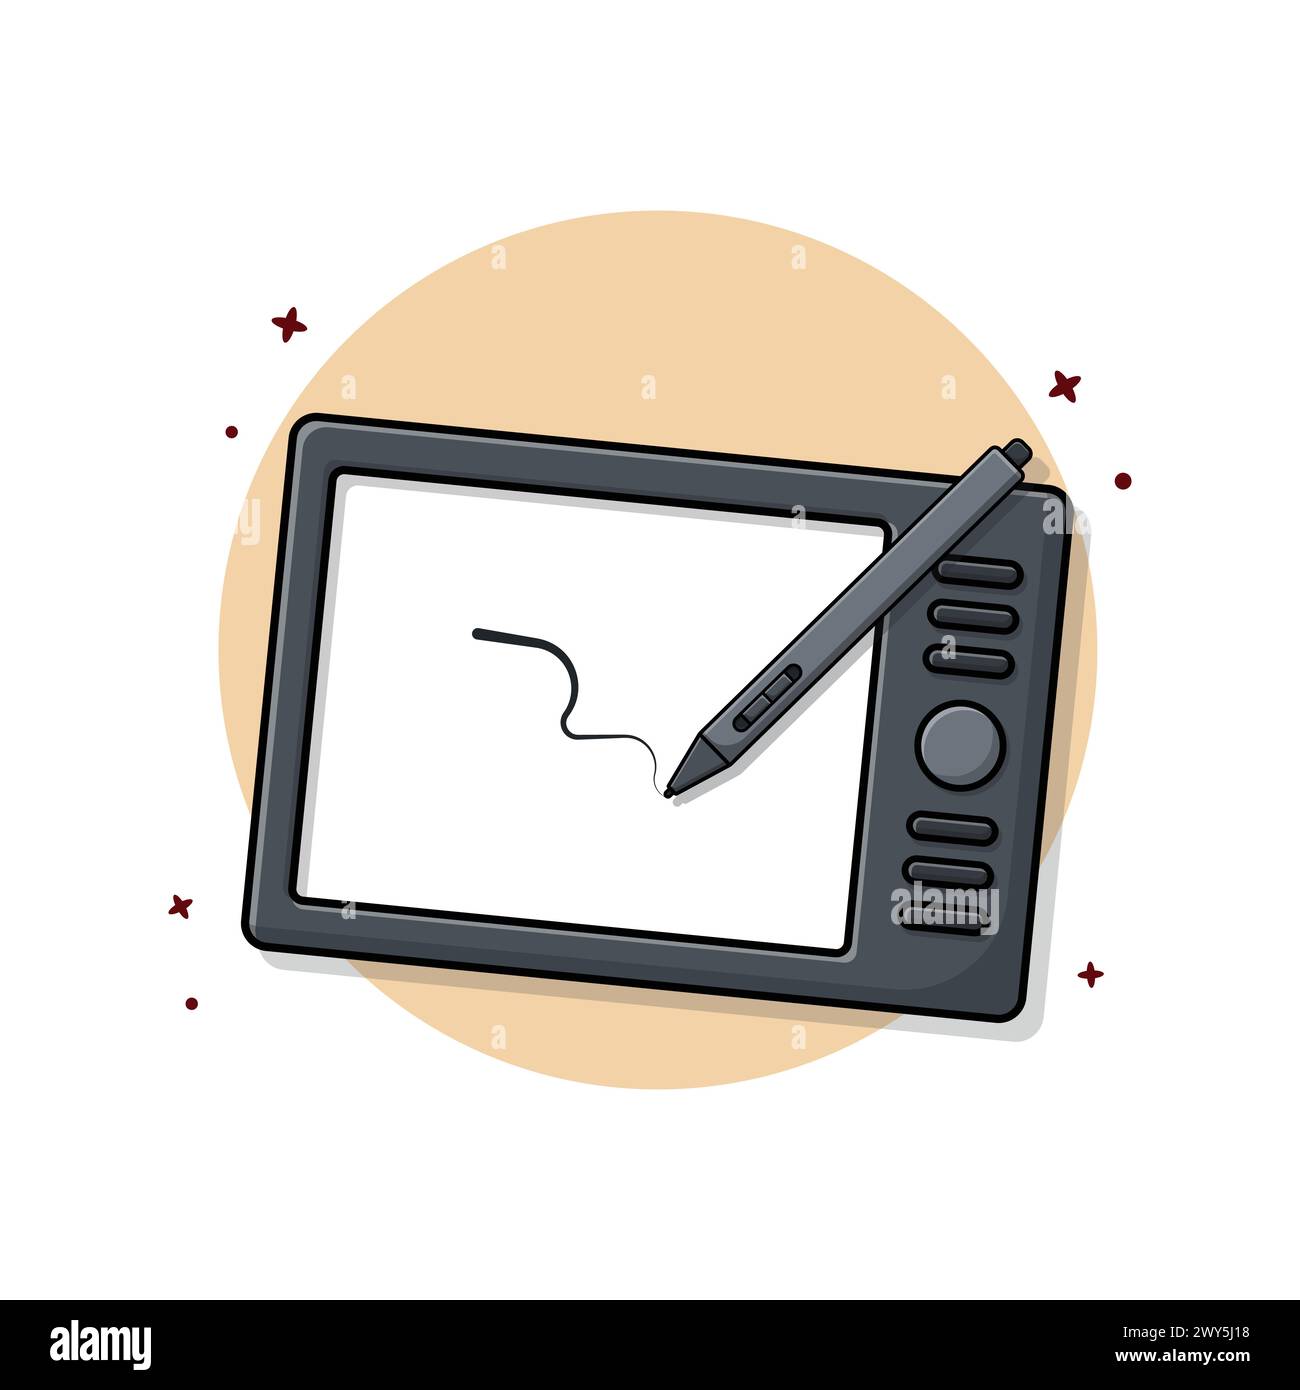 Graphic Tablet and Pen Vector Illustration. Gadgets and Devices Concept Design Stock Vector